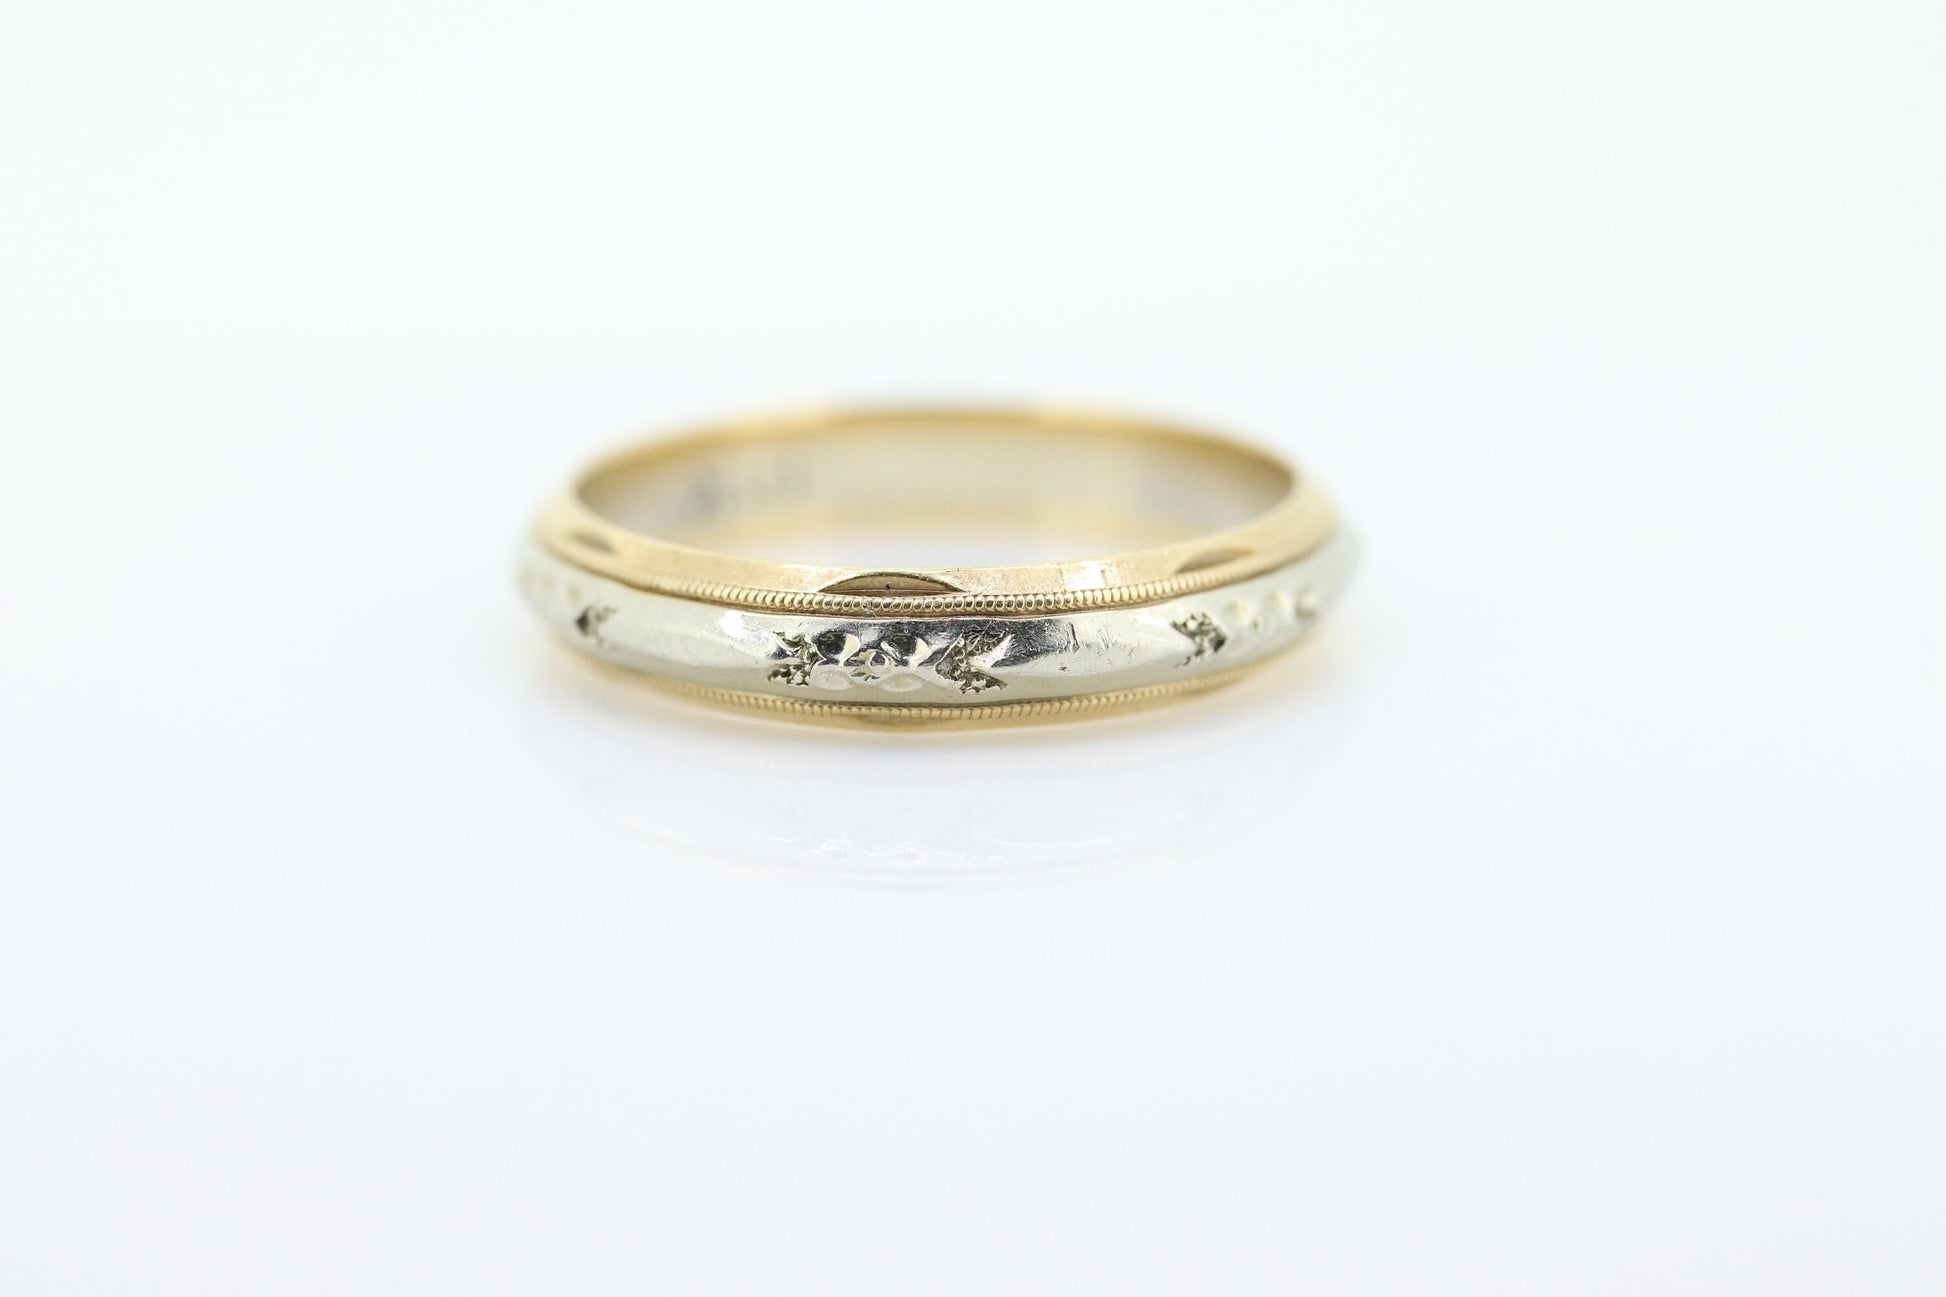 sz11 Engraved Gold band. 14k Two Tone White and Yellow wedding band. Stackable ring. Vintage 1940s. Tu-tone band. st(161/11)